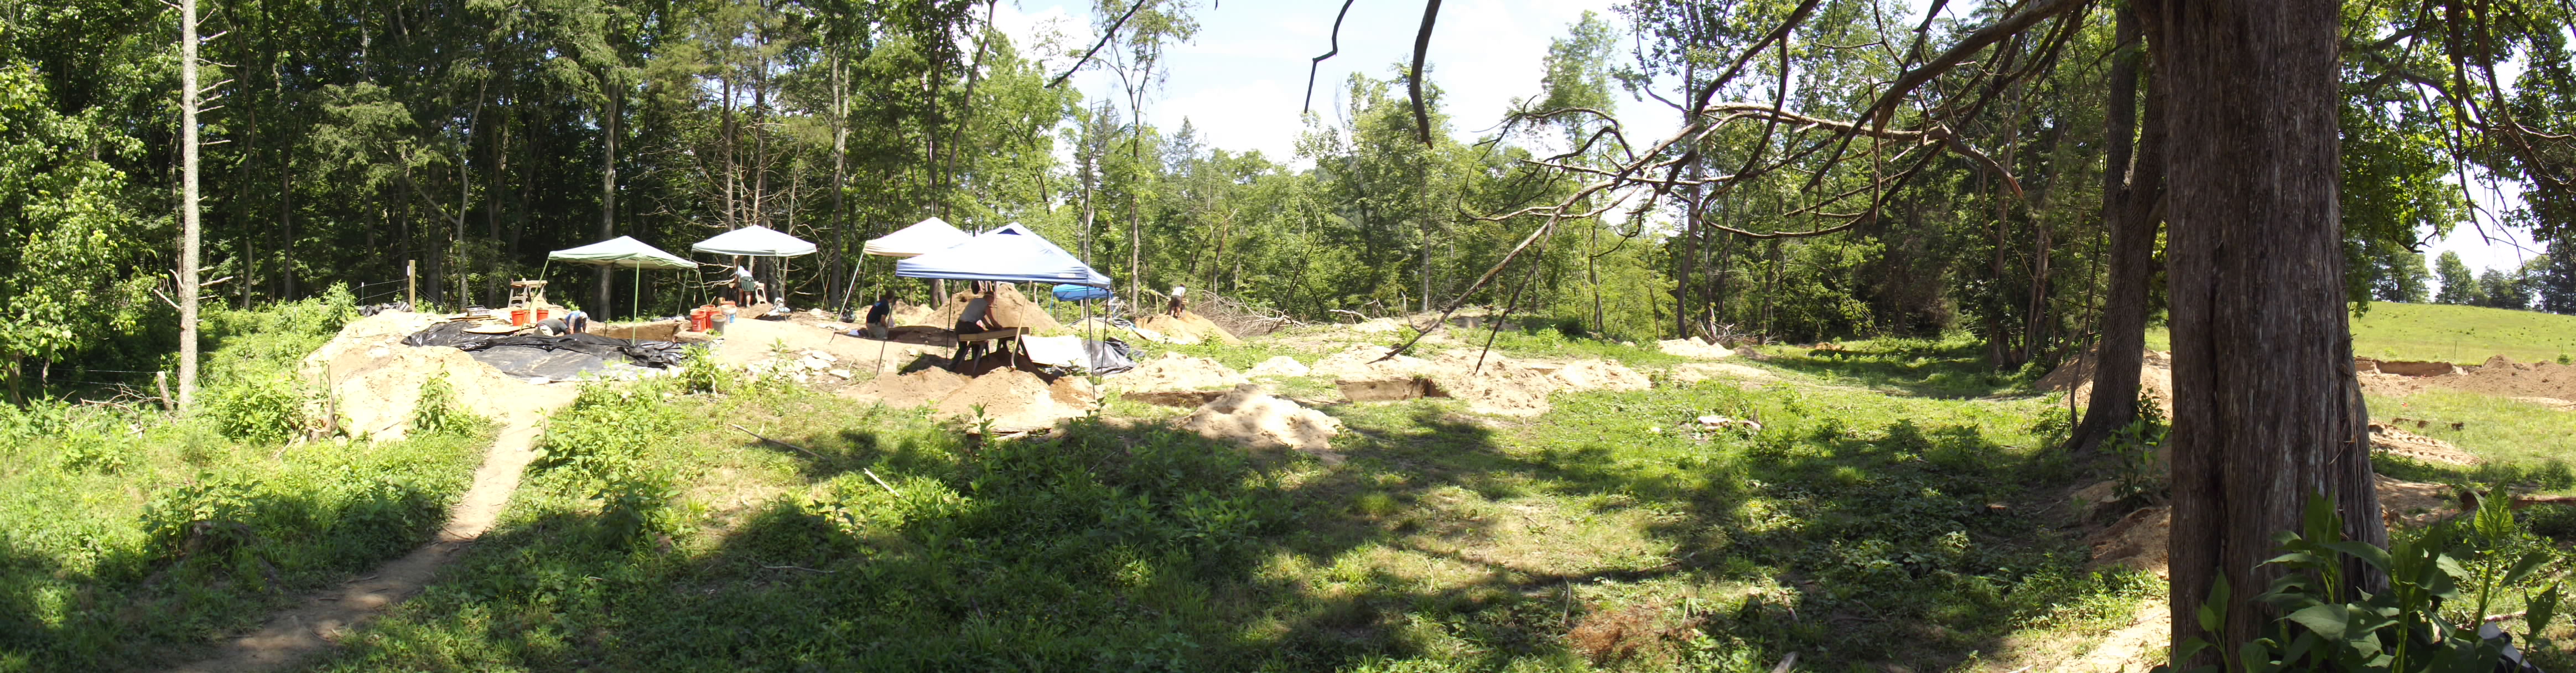 Archaeology Dig Site